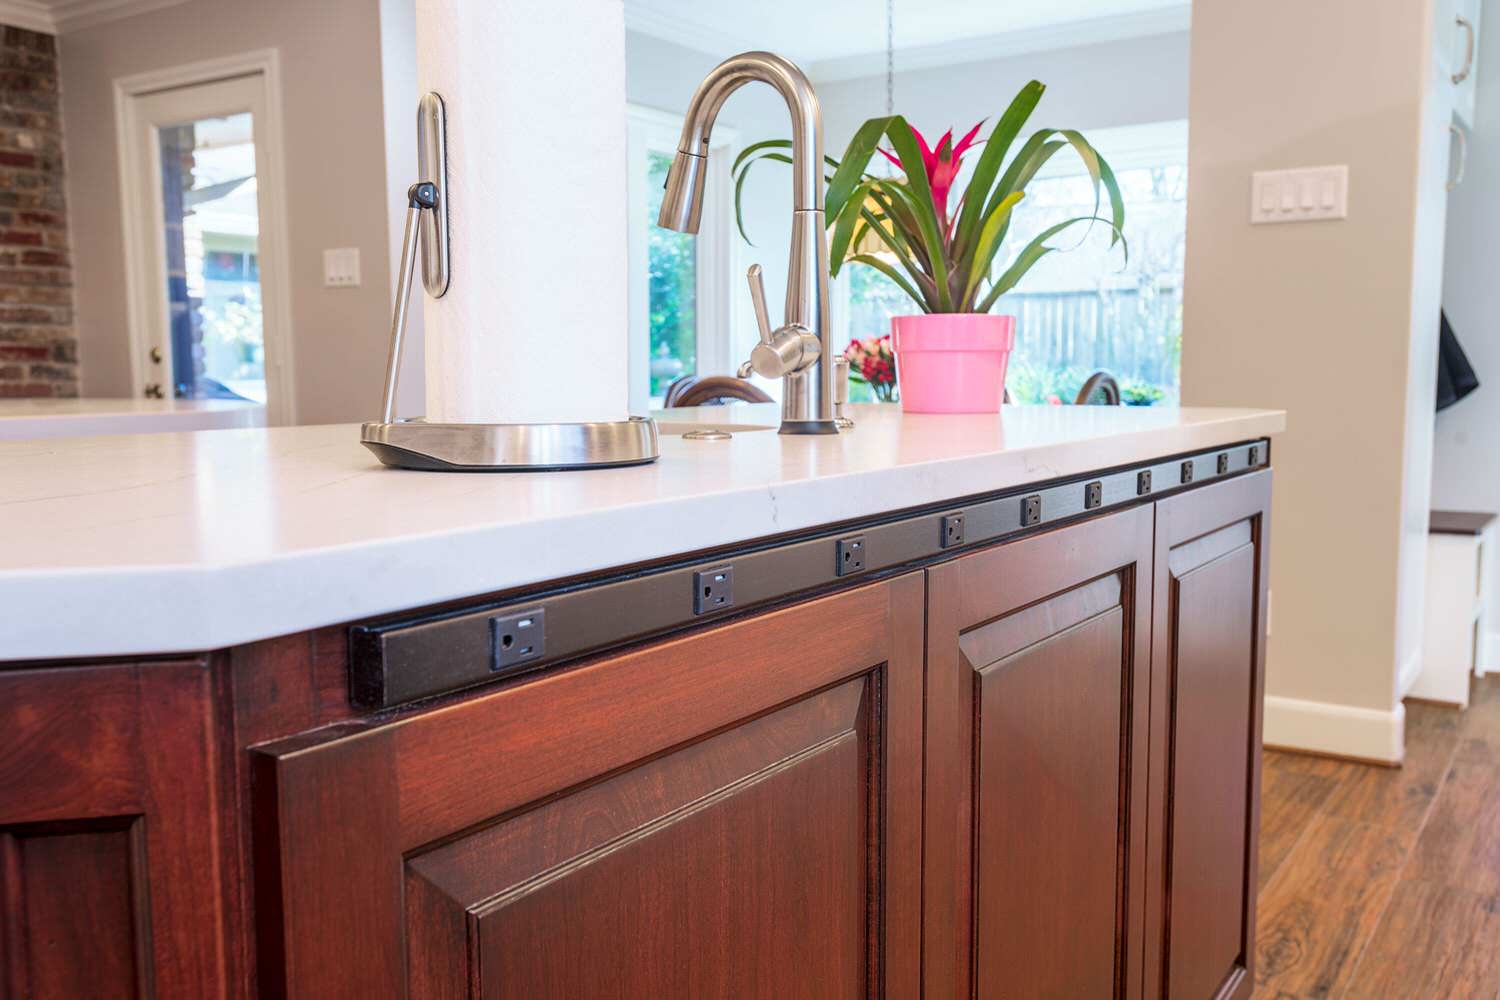 Easy access receptacles for a busy island